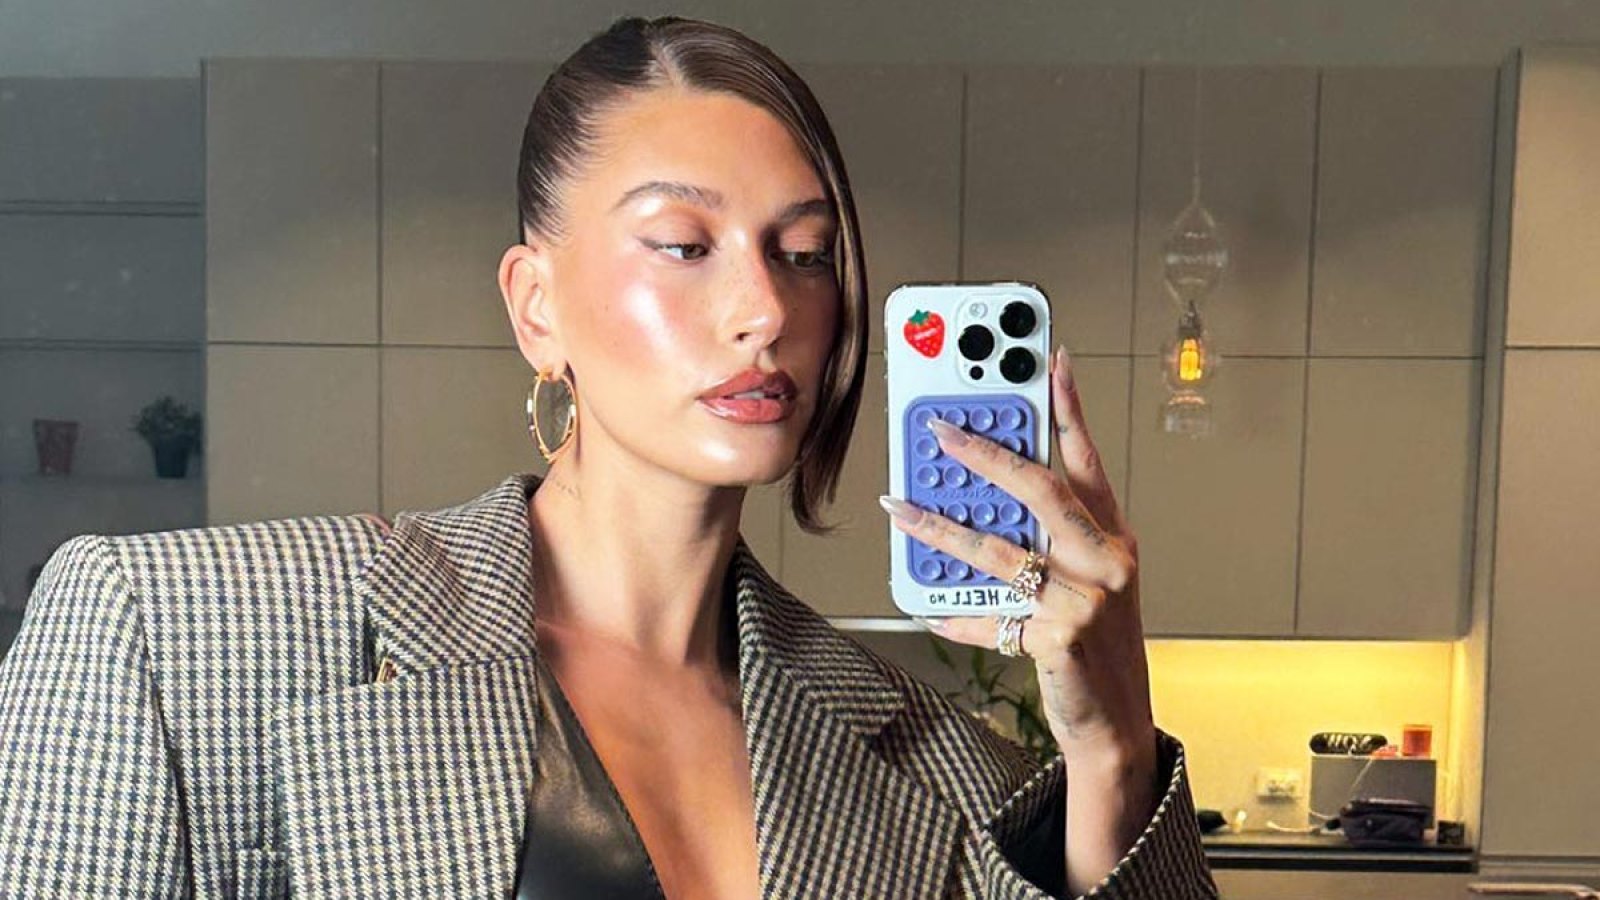 Hailey Bieber Is Hot AF in NYFW Outfit